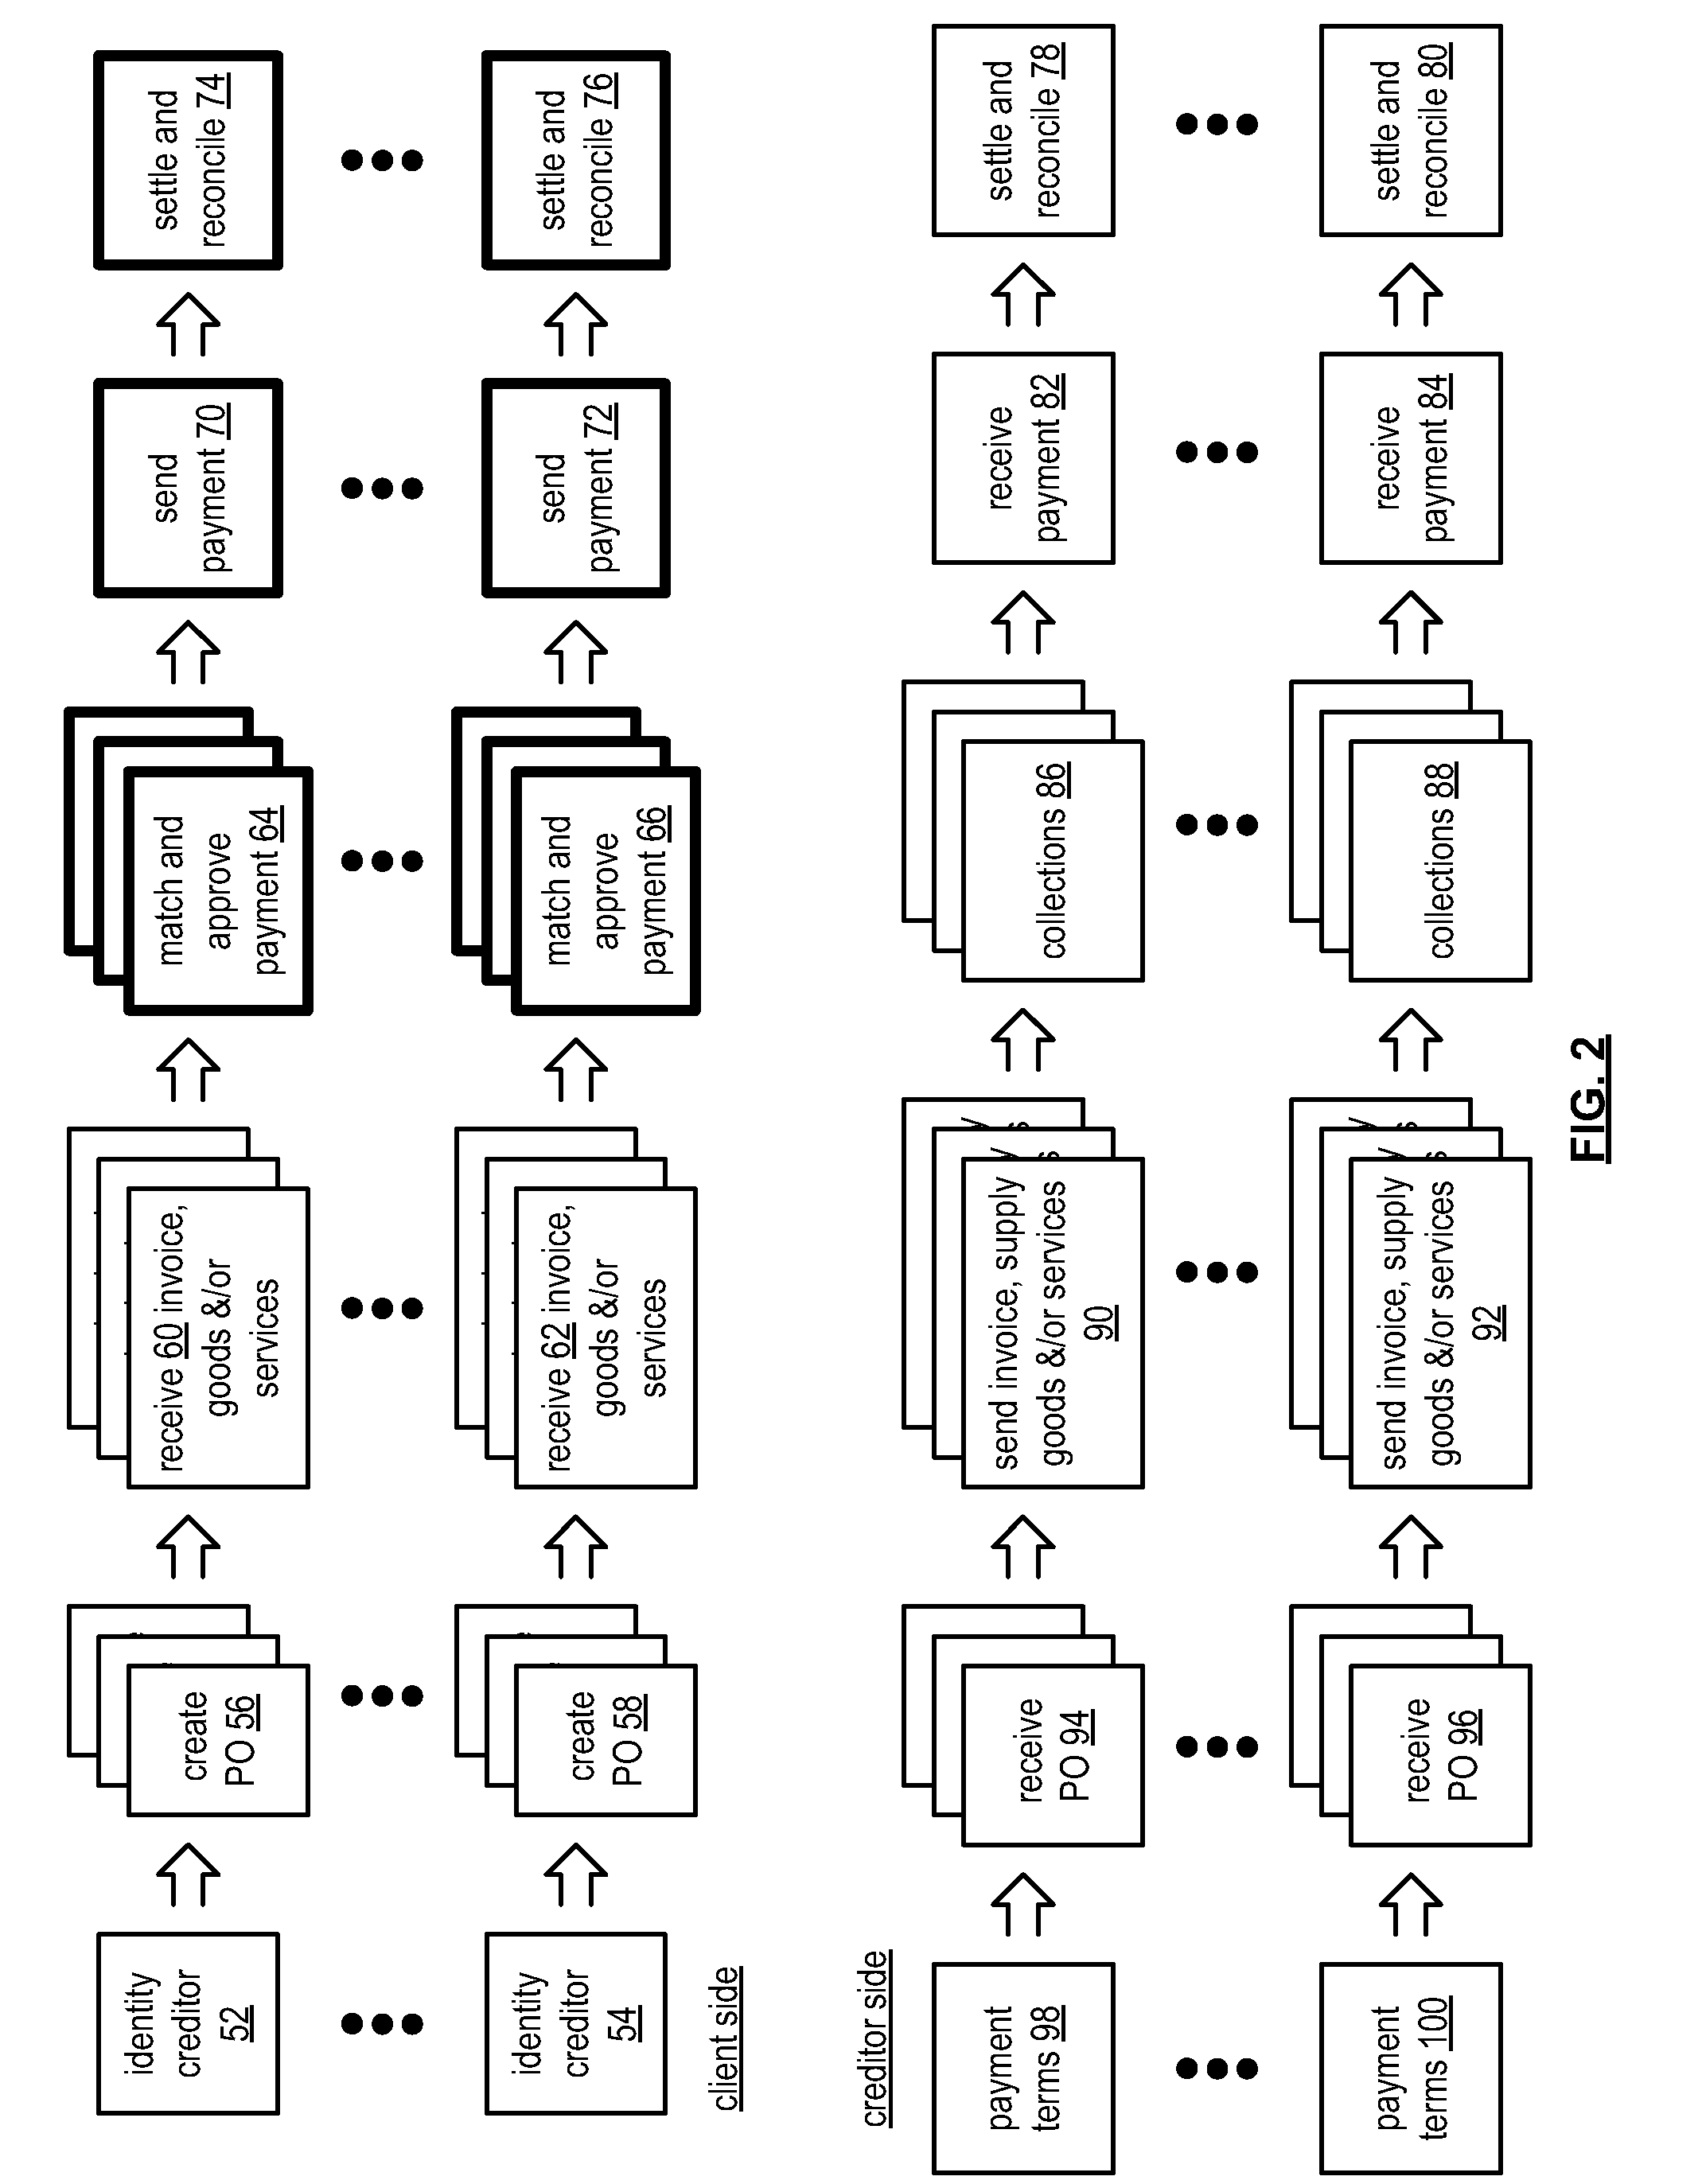 Payment entity for account payables processing using multiple payment methods